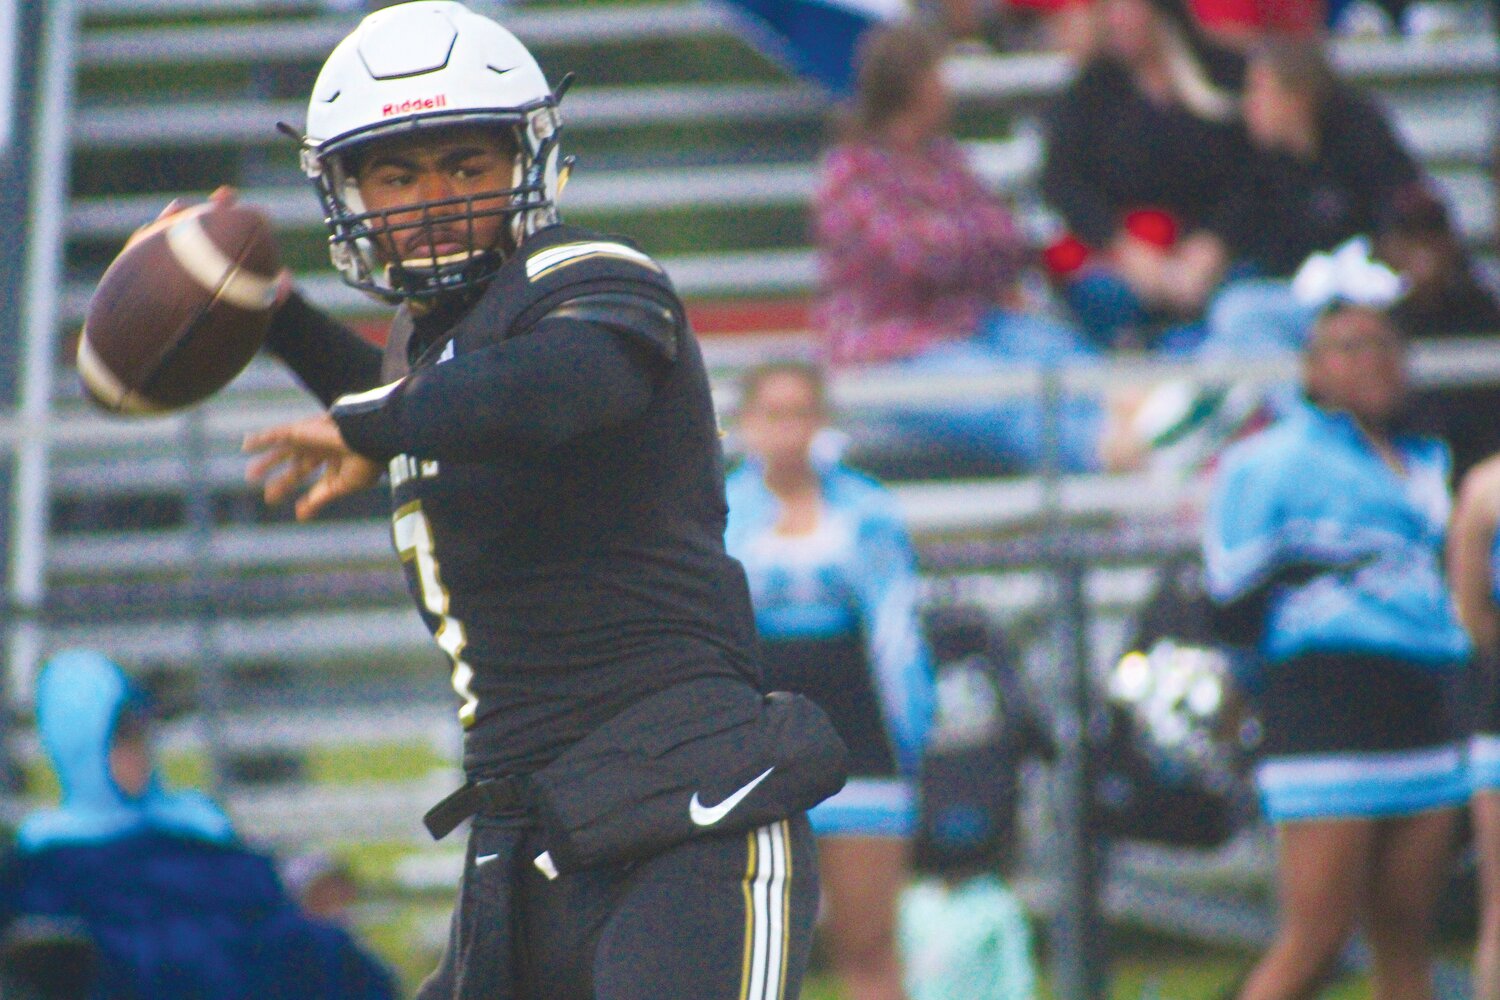 Oakleaf High senior Brandon Wallace, Jr., is getting his shot in the big games as he opens as the probable starter for the Knights under first year coach Chris Foy. Wallace is smart, agile and a quiet tactician that can use the weapons around him to get downfield.